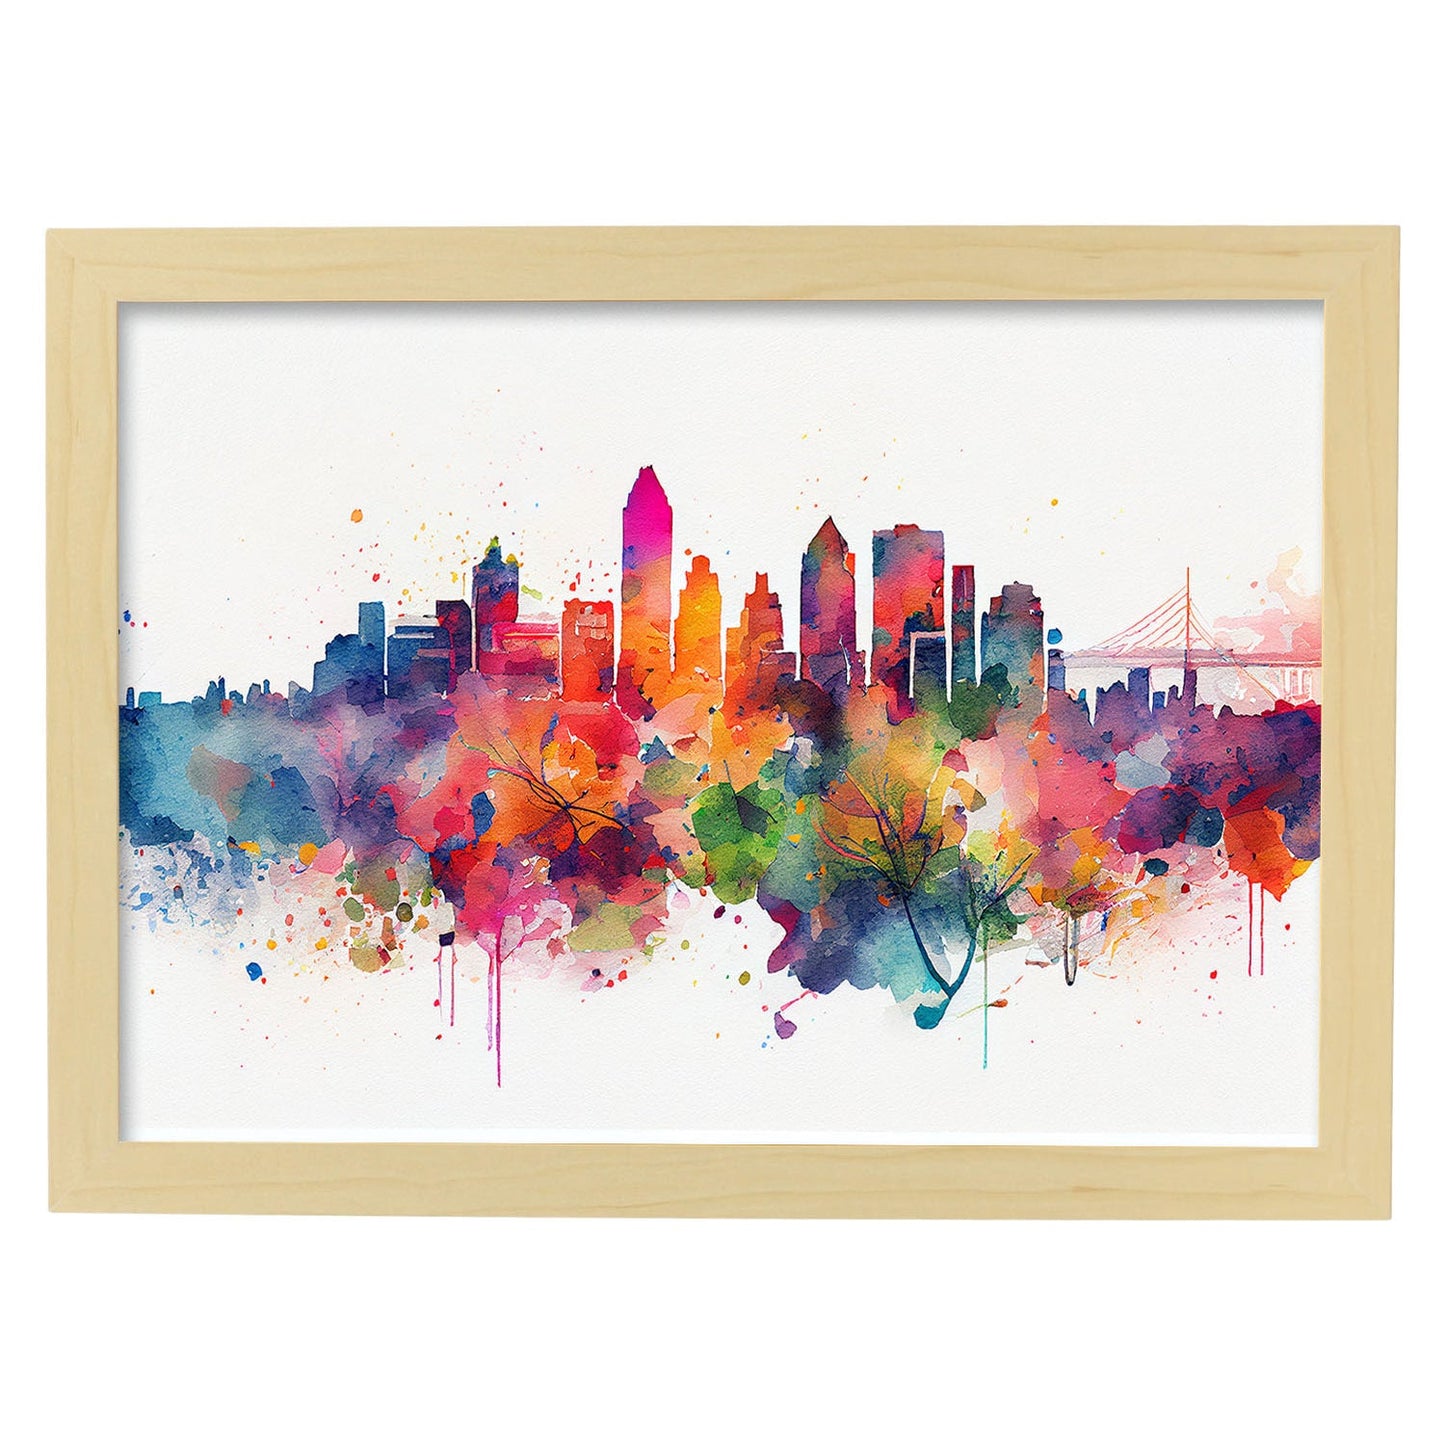 Nacnic watercolor of a skyline of the city of Montreal_1. Aesthetic Wall Art Prints for Bedroom or Living Room Design.-Artwork-Nacnic-A4-Marco Madera Clara-Nacnic Estudio SL